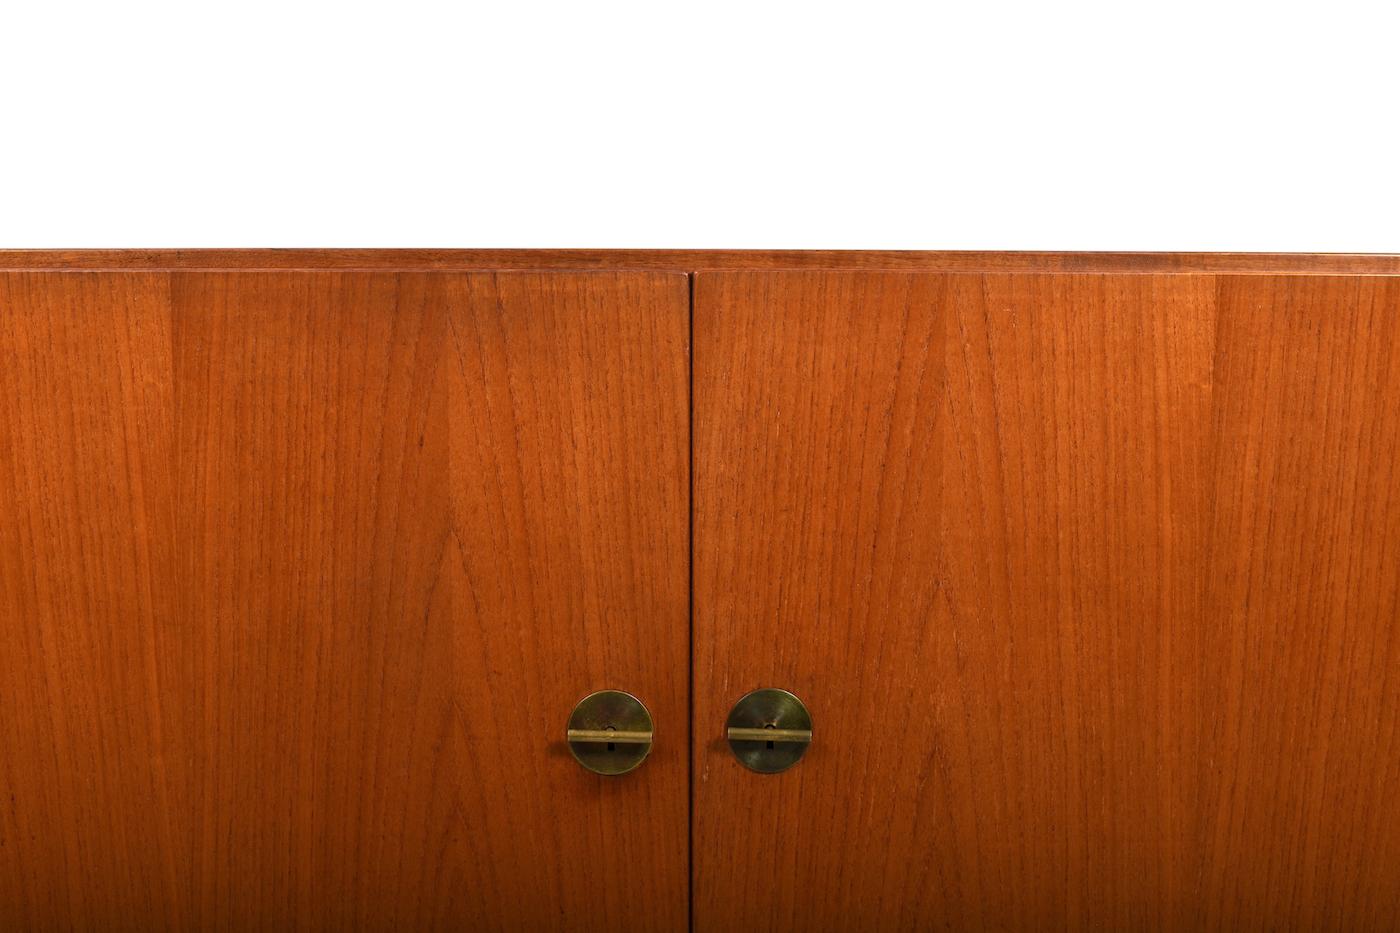 Sideboard / cabinet, model no.232 by Børge Mogensen for FDB Møbler. Brass handles. He designed his China Series in 1960s. Made in teak and produced 1960s. Early model with big drawer inside.